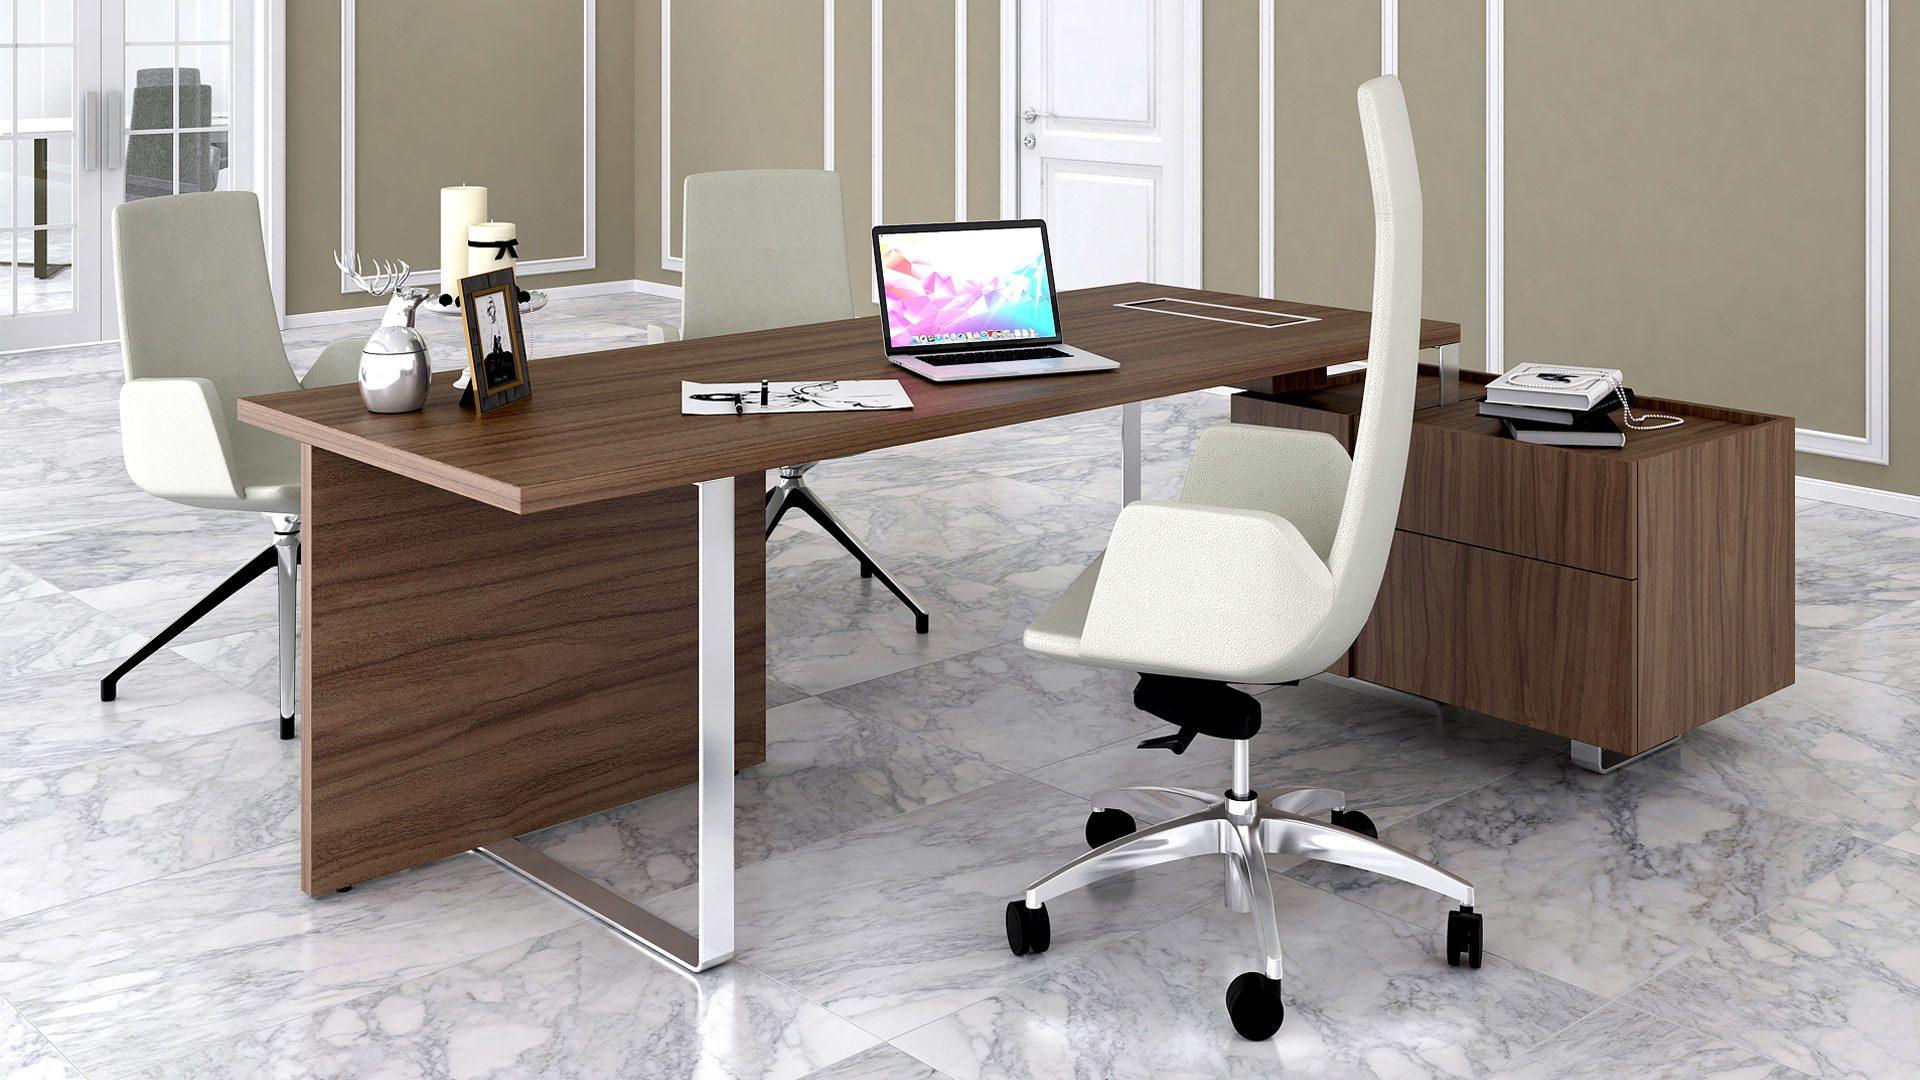 Plana executive desk in dark walnut with North Cape task and meeting chairs